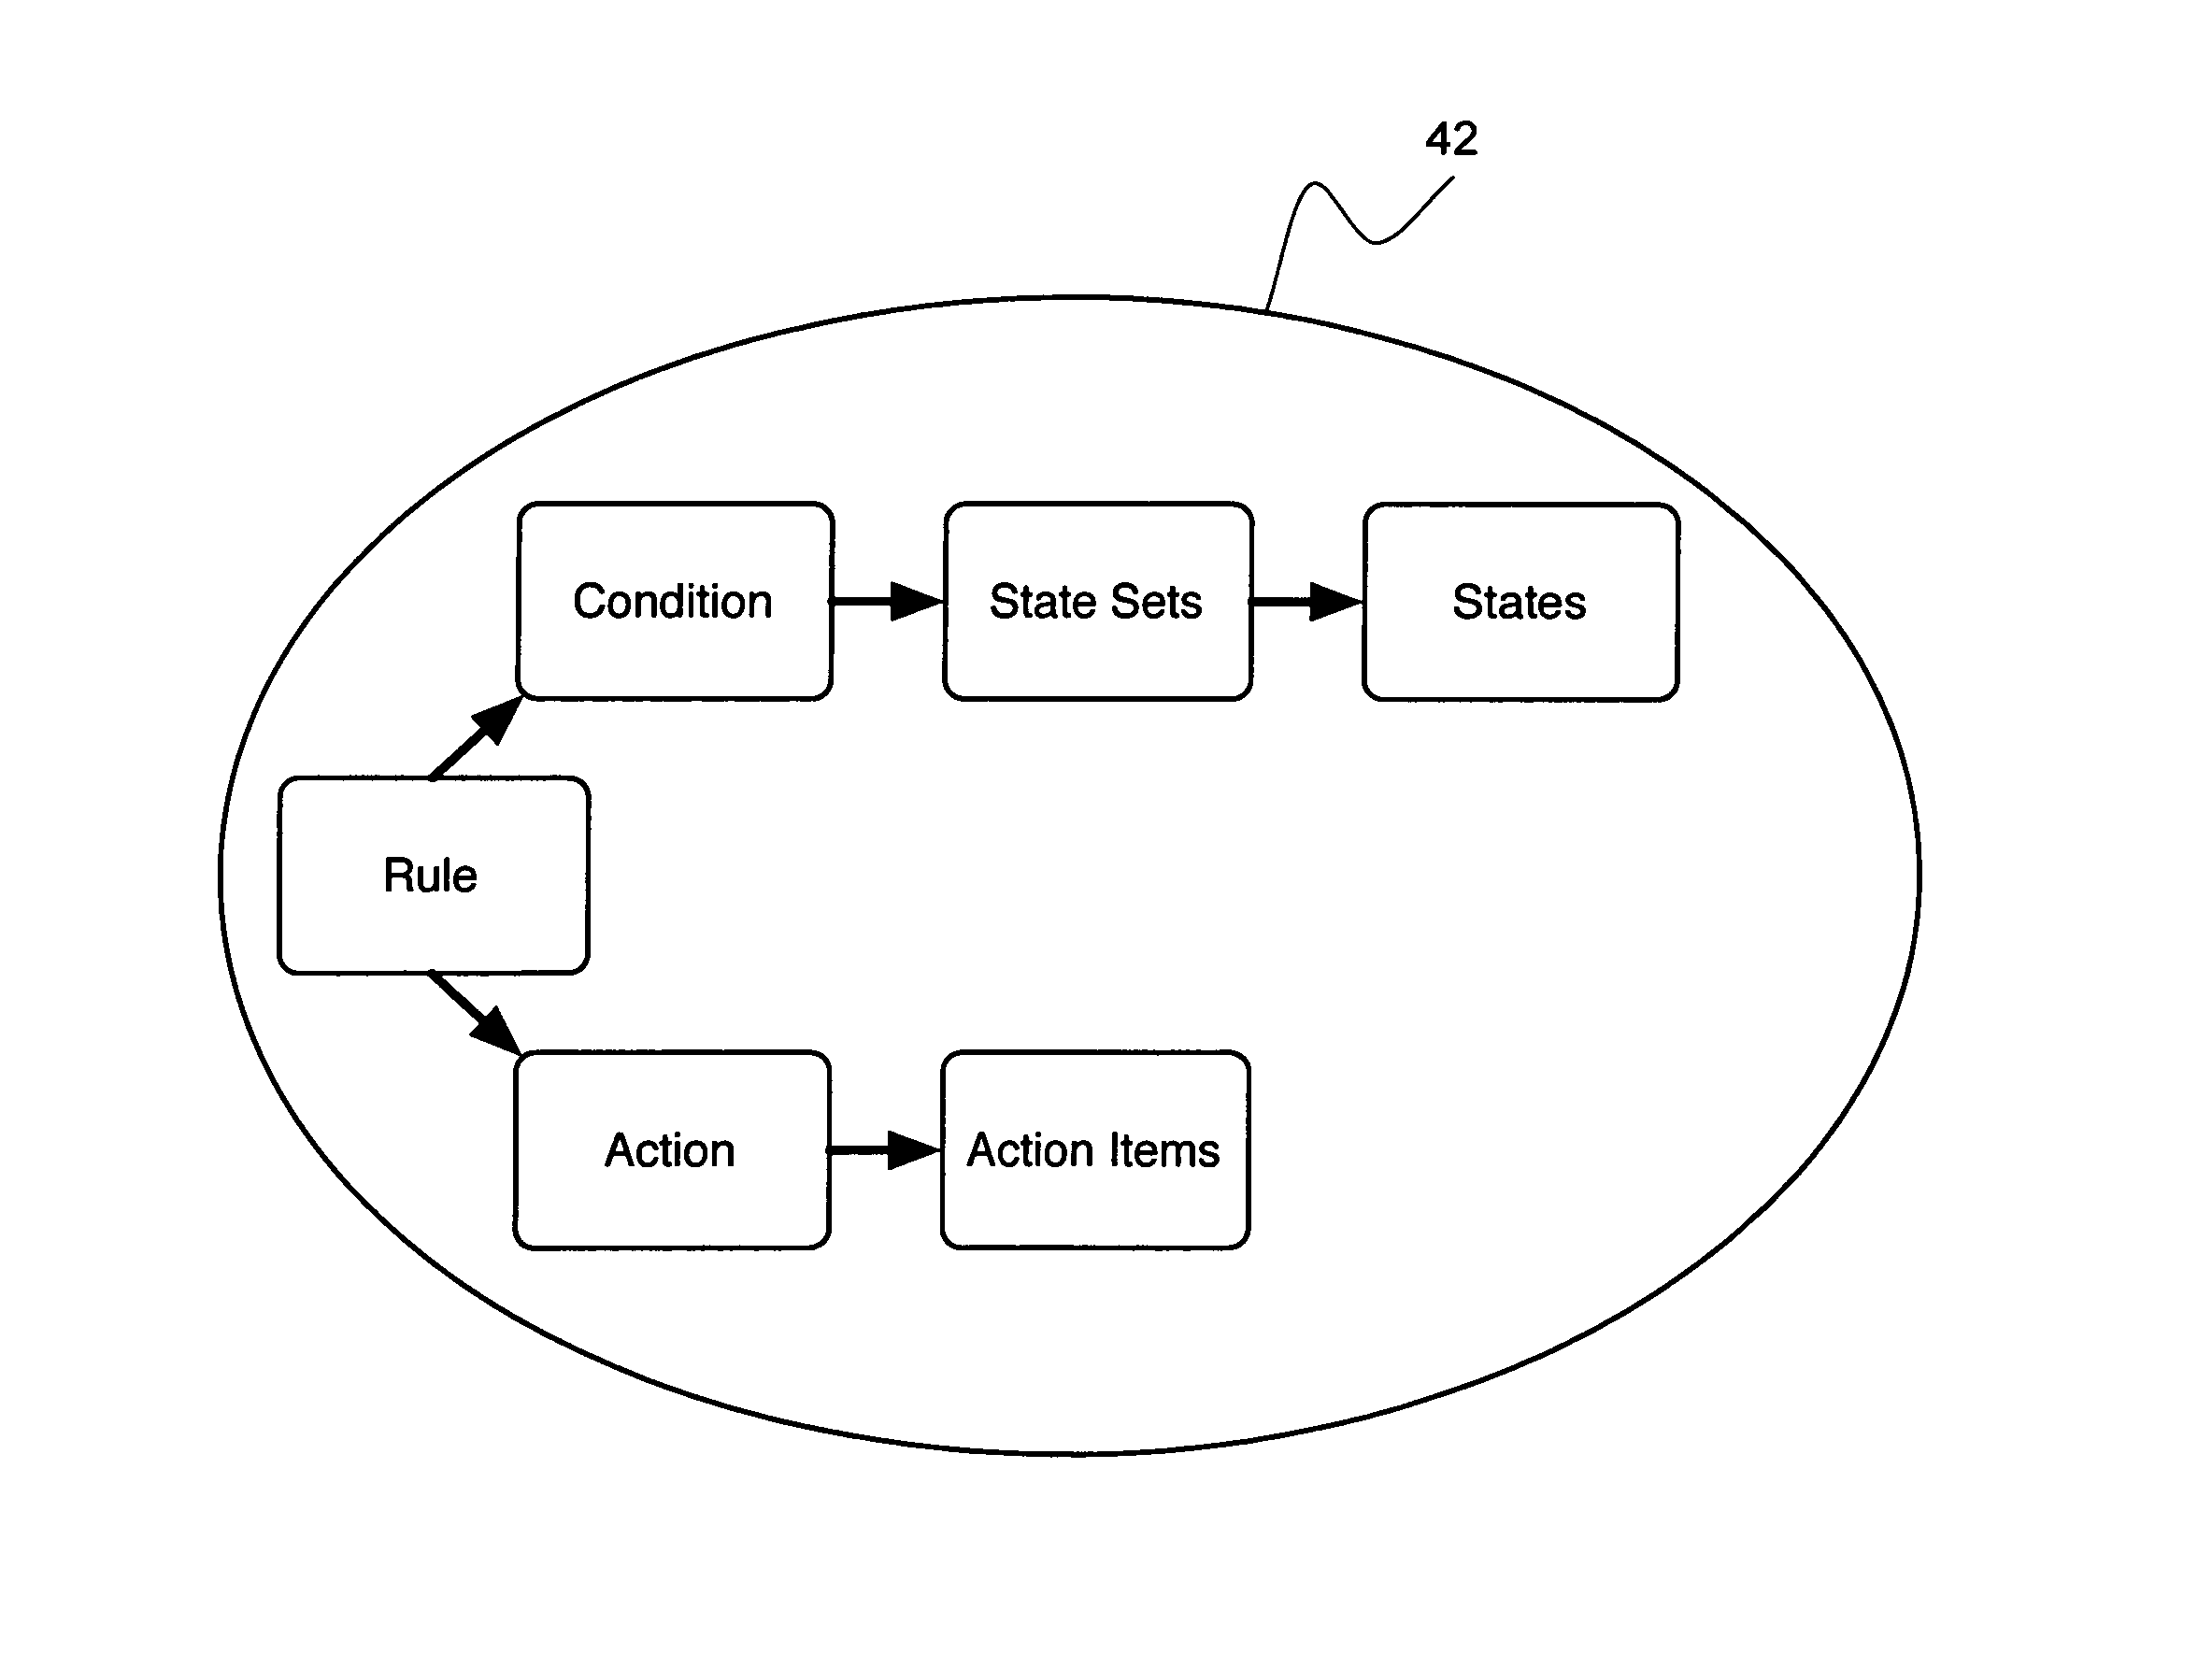 System and method for automating the development of web services